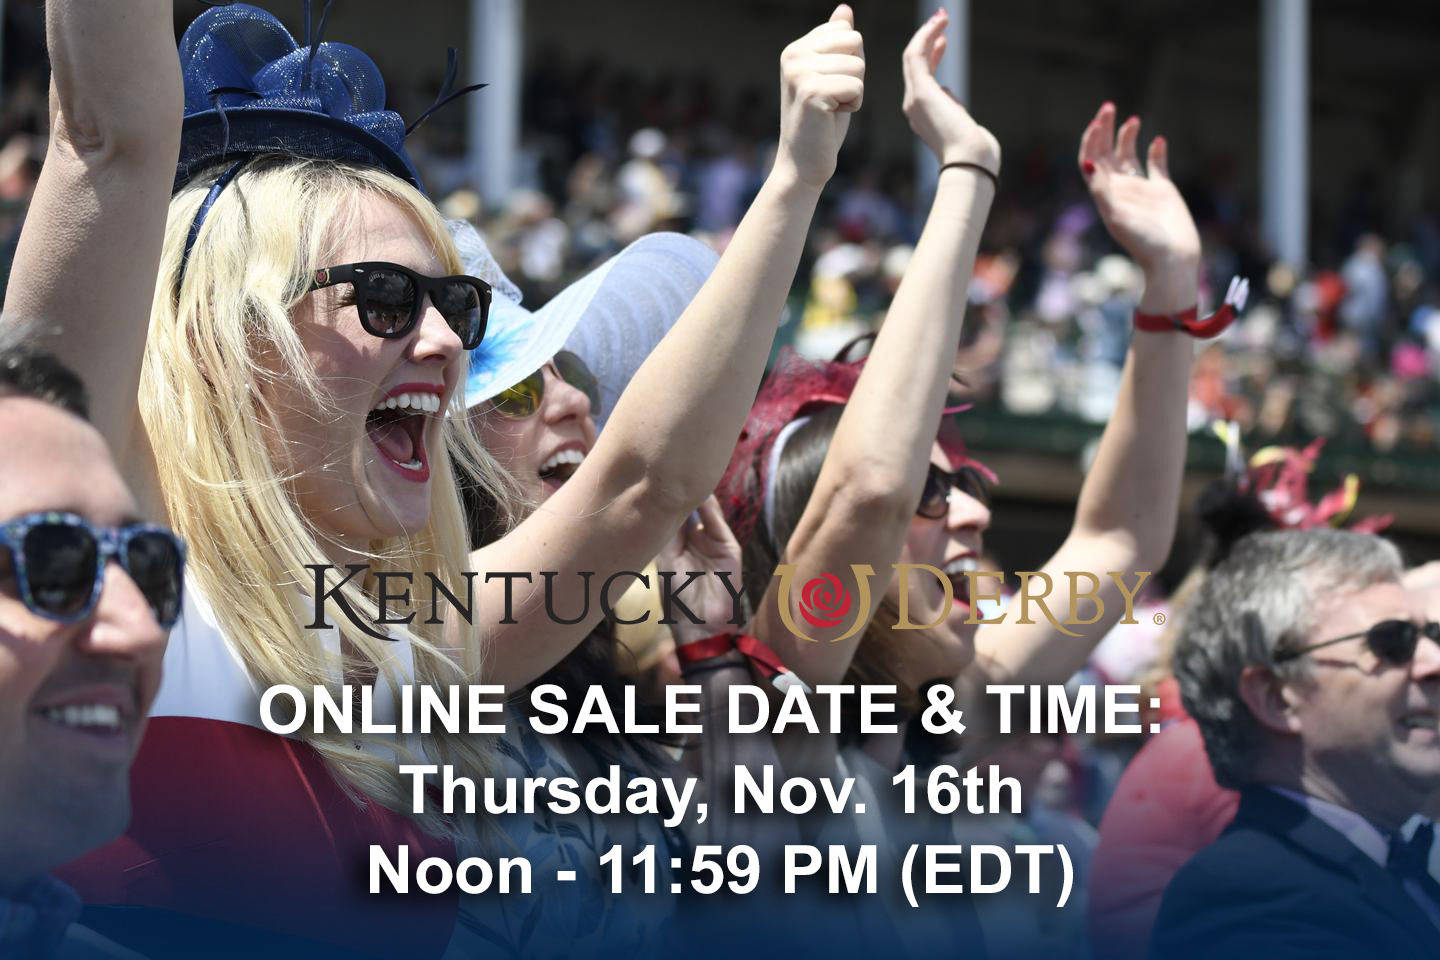 Exclusive Presale access for 2018 Kentucky Derby Ticket Sale